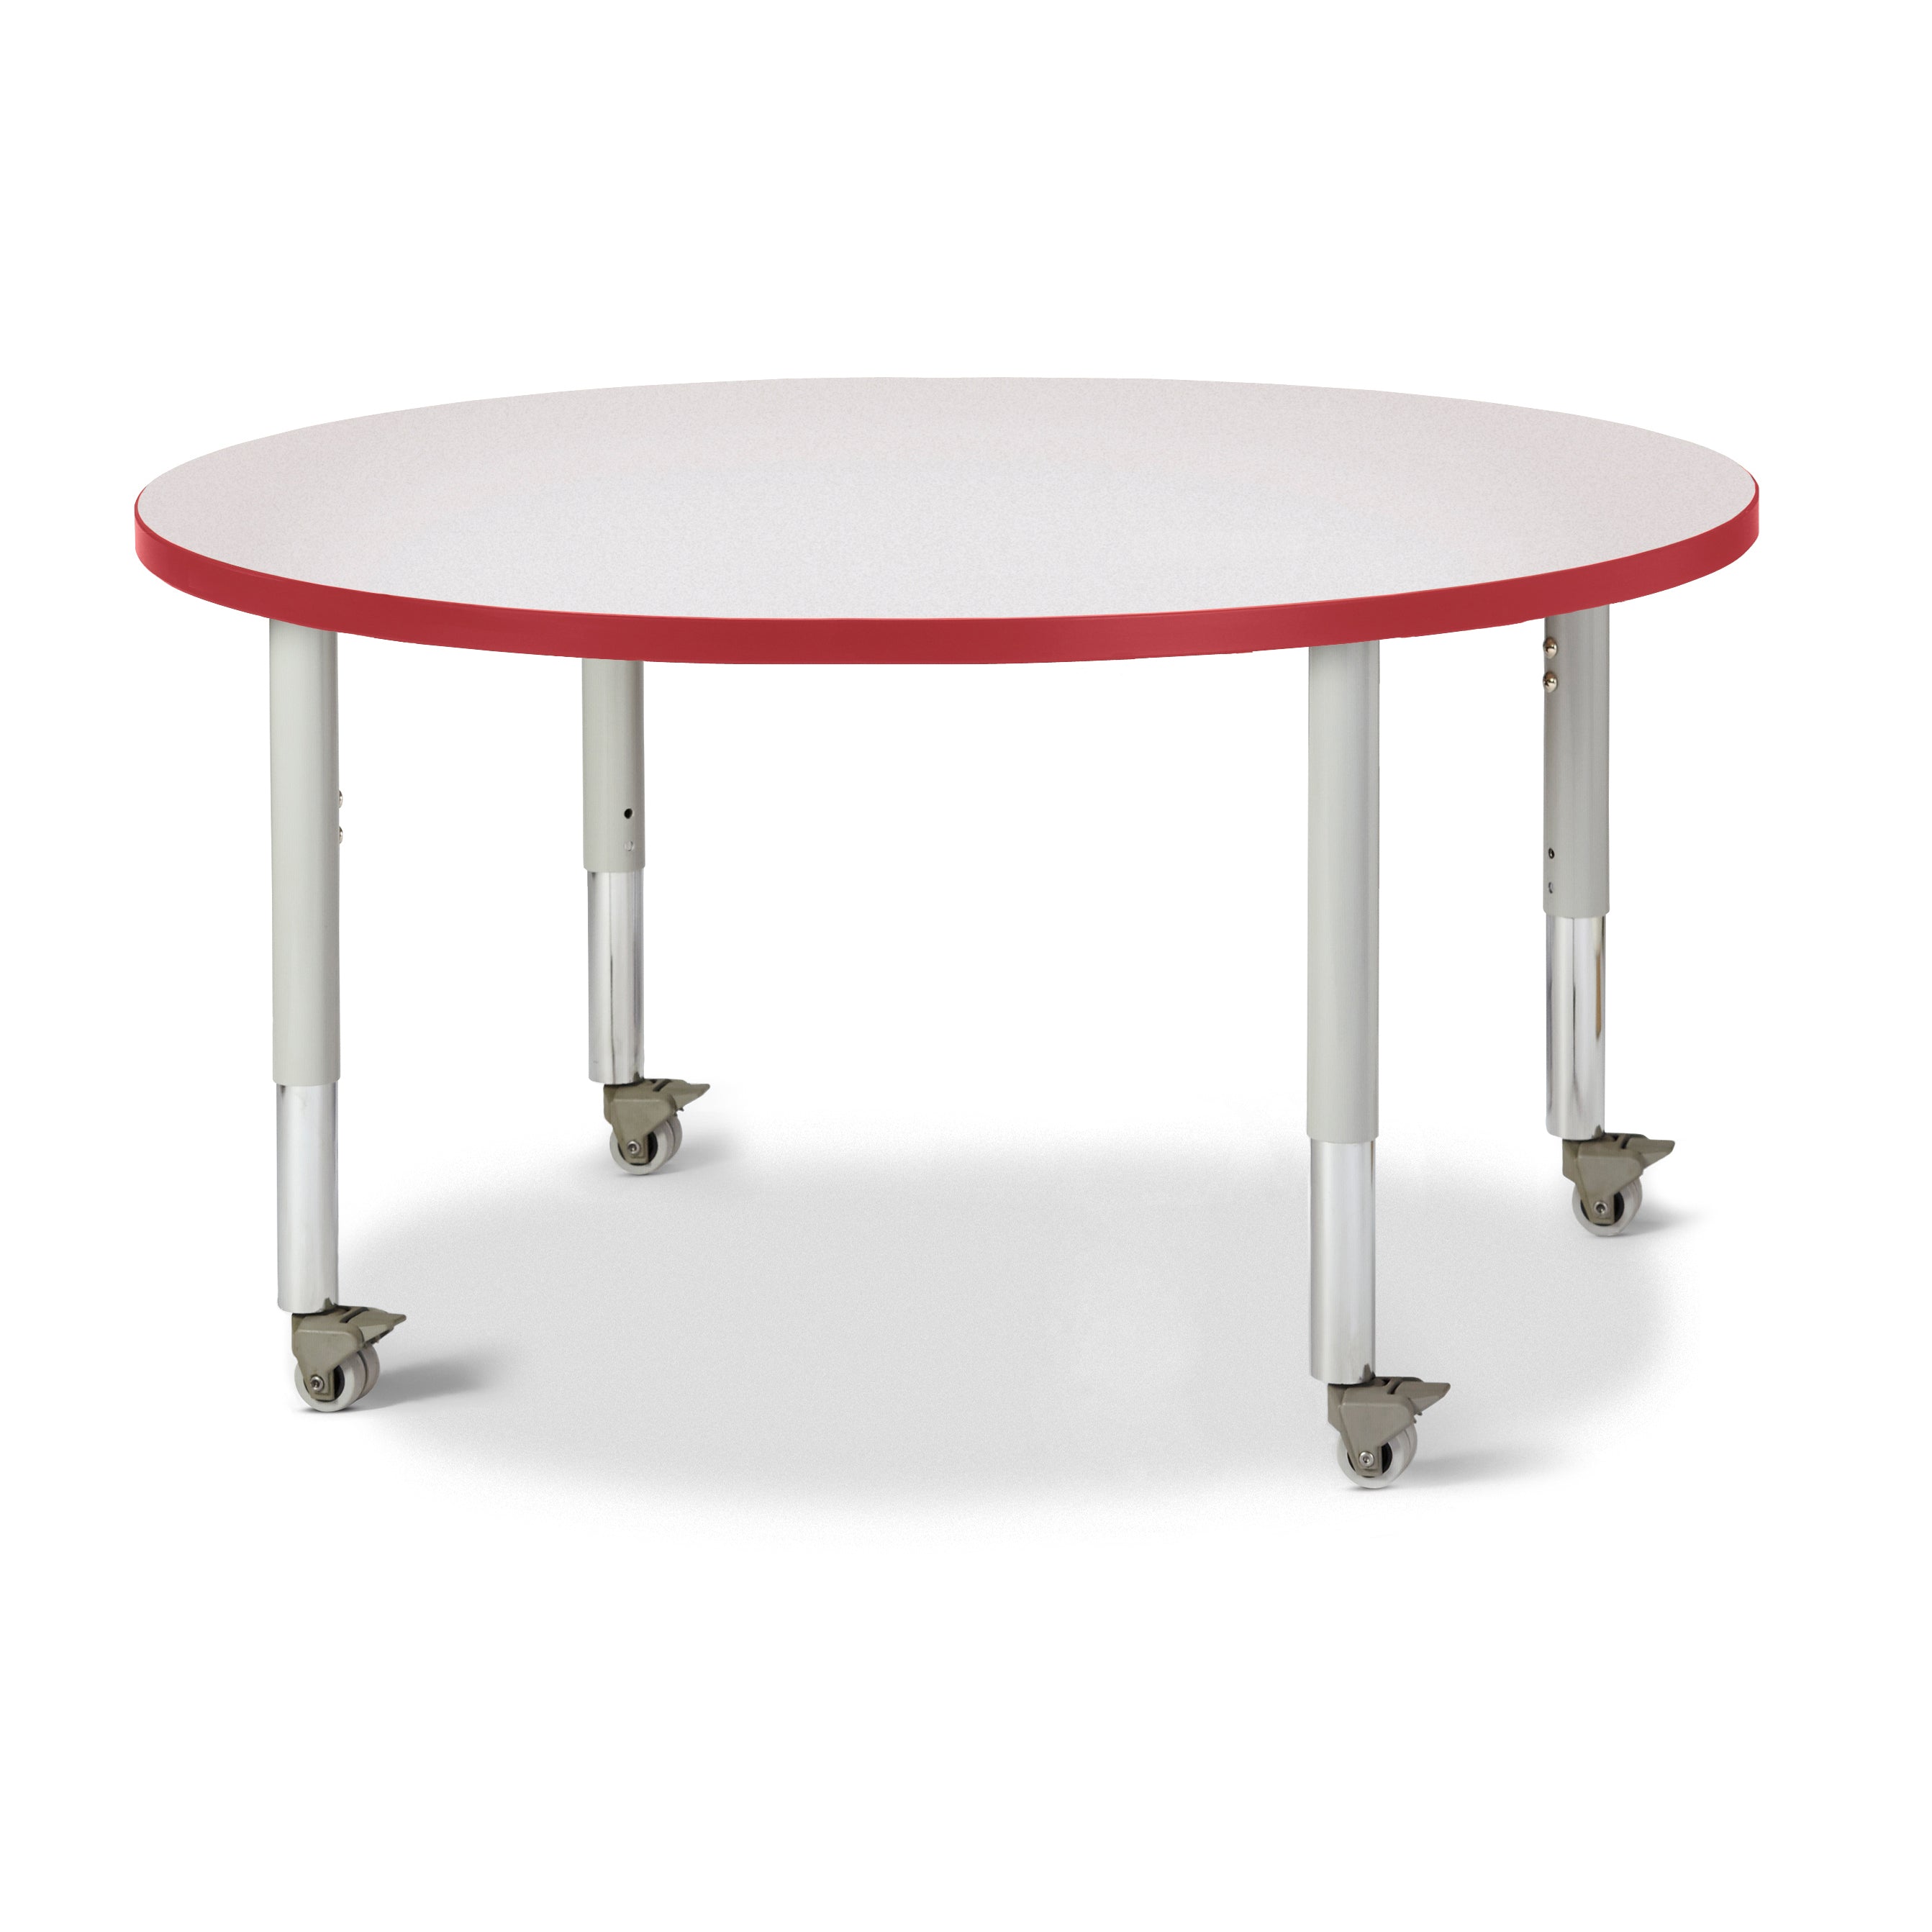 6468JCM008, Berries Round Activity Table - 42" Diameter, Mobile - Freckled Gray/Red/Gray